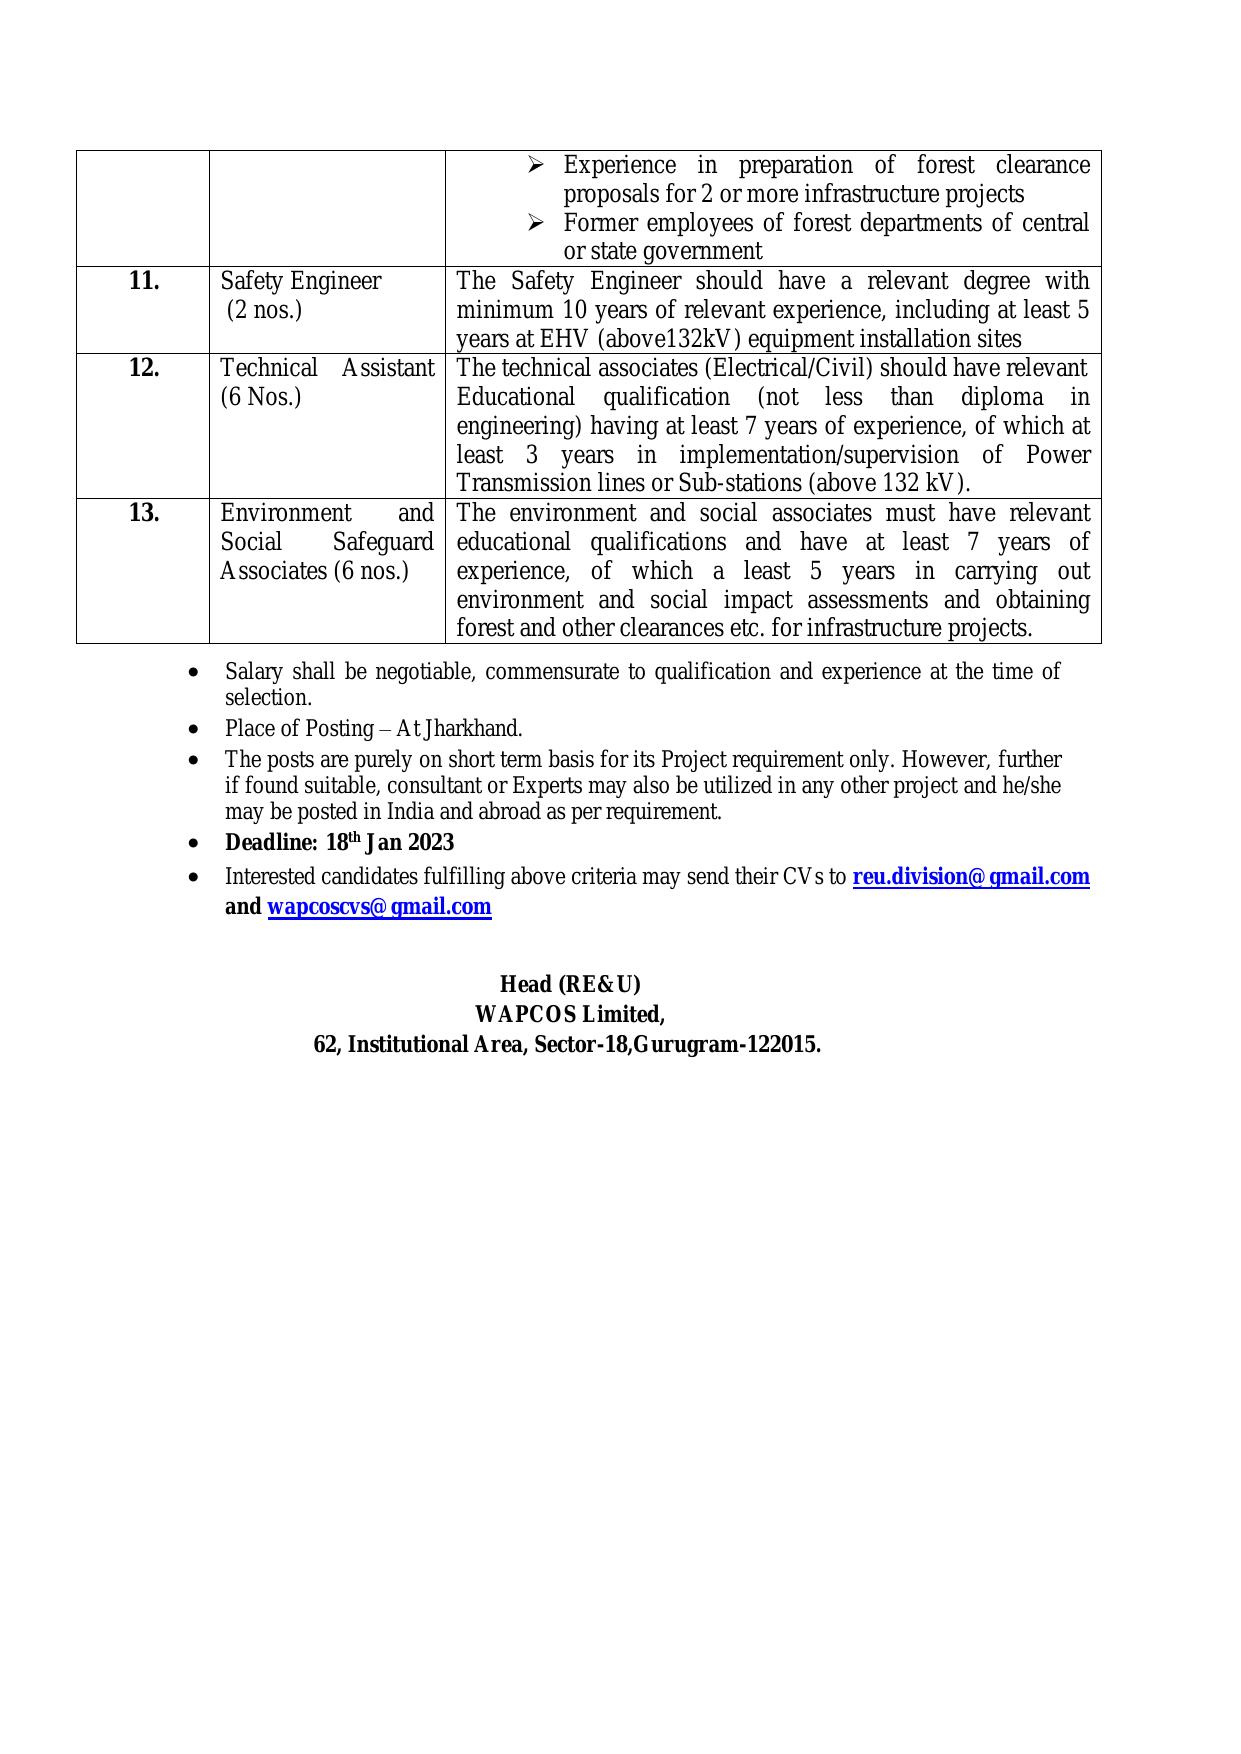 WAPCOS Limited Invites Application for 40 Substation Design Engineer, More Vacancies Recruitment 2023 - Page 2